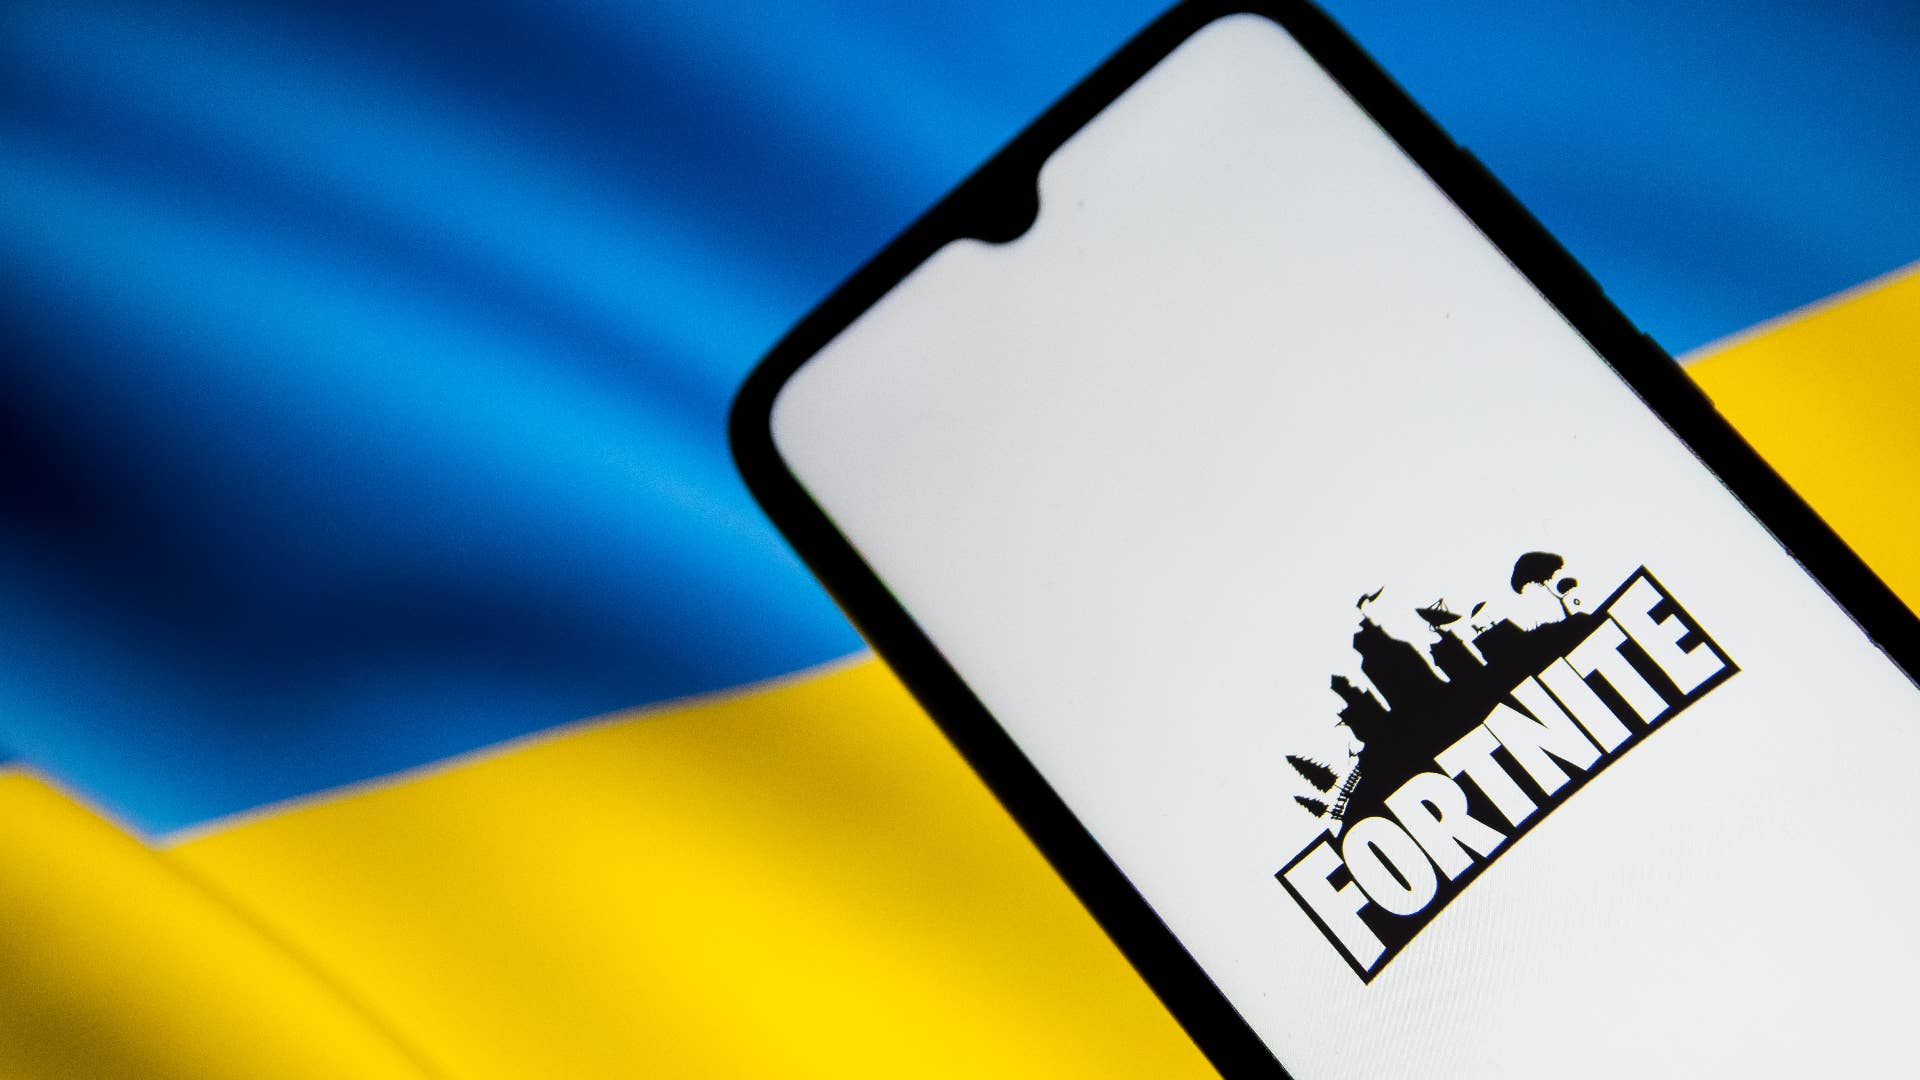 'Fortnite' logo on a smartphone screen with Ukraine flag in the background.